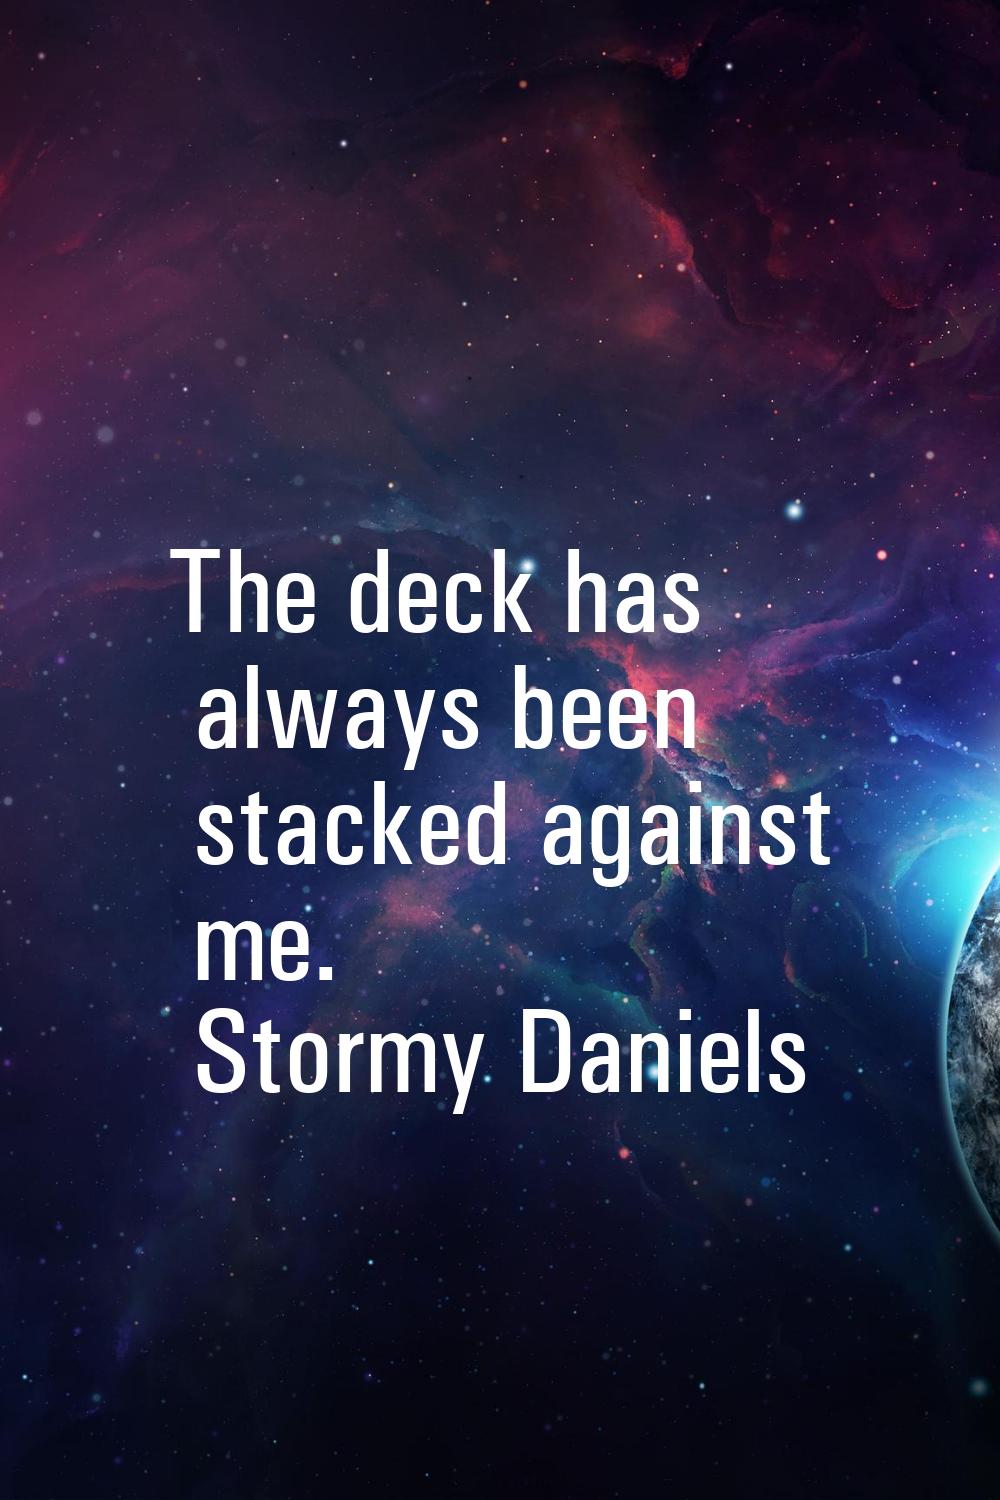 The deck has always been stacked against me.